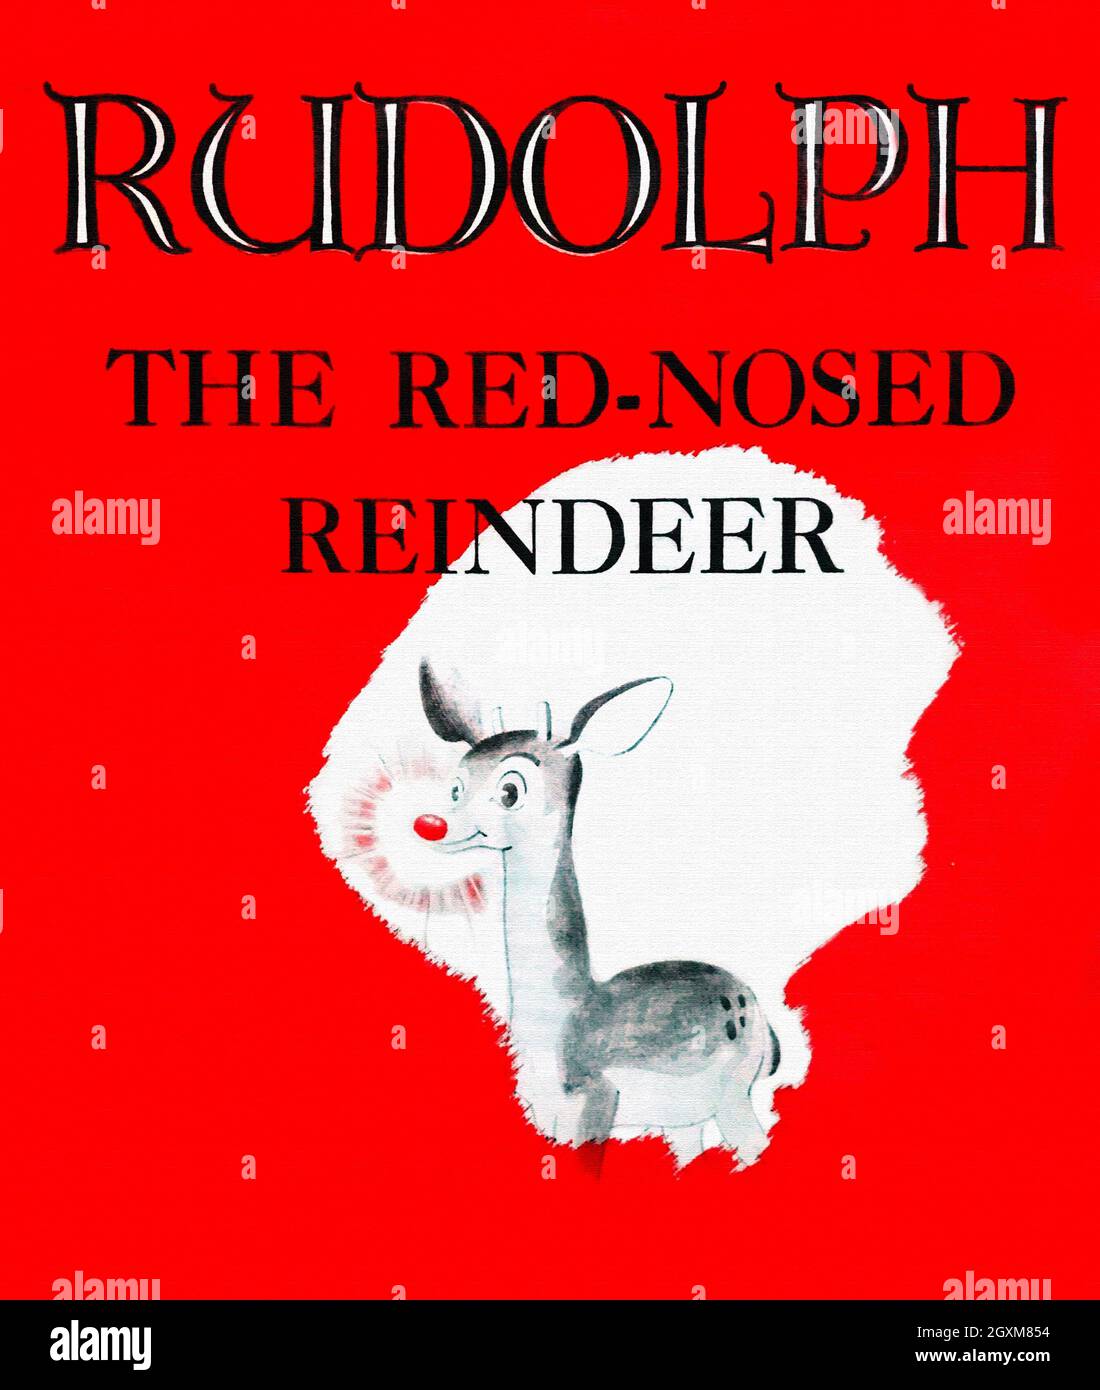 Rudolph the Red-Nosed Reindeer Stockfoto